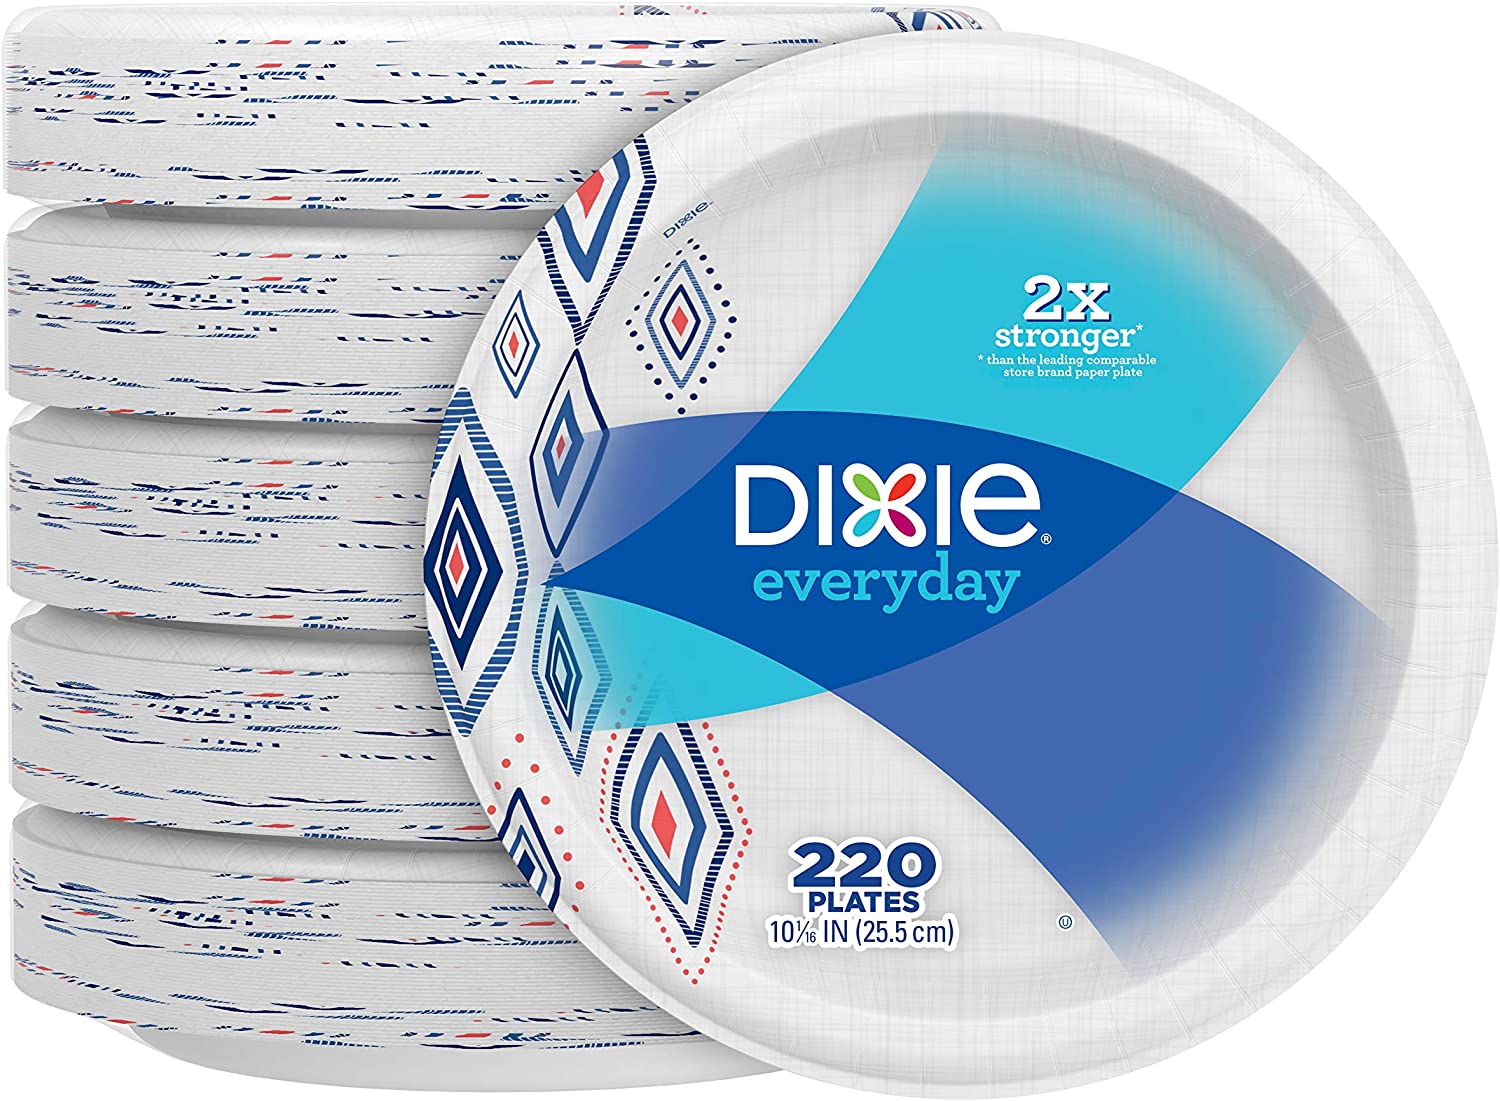 0 1 5 Packs of 44 Plates 220 Count ! Pack//220 Count Everyday Paper Plates,10 1//16inch Dinner Size Printed Disposable Plate